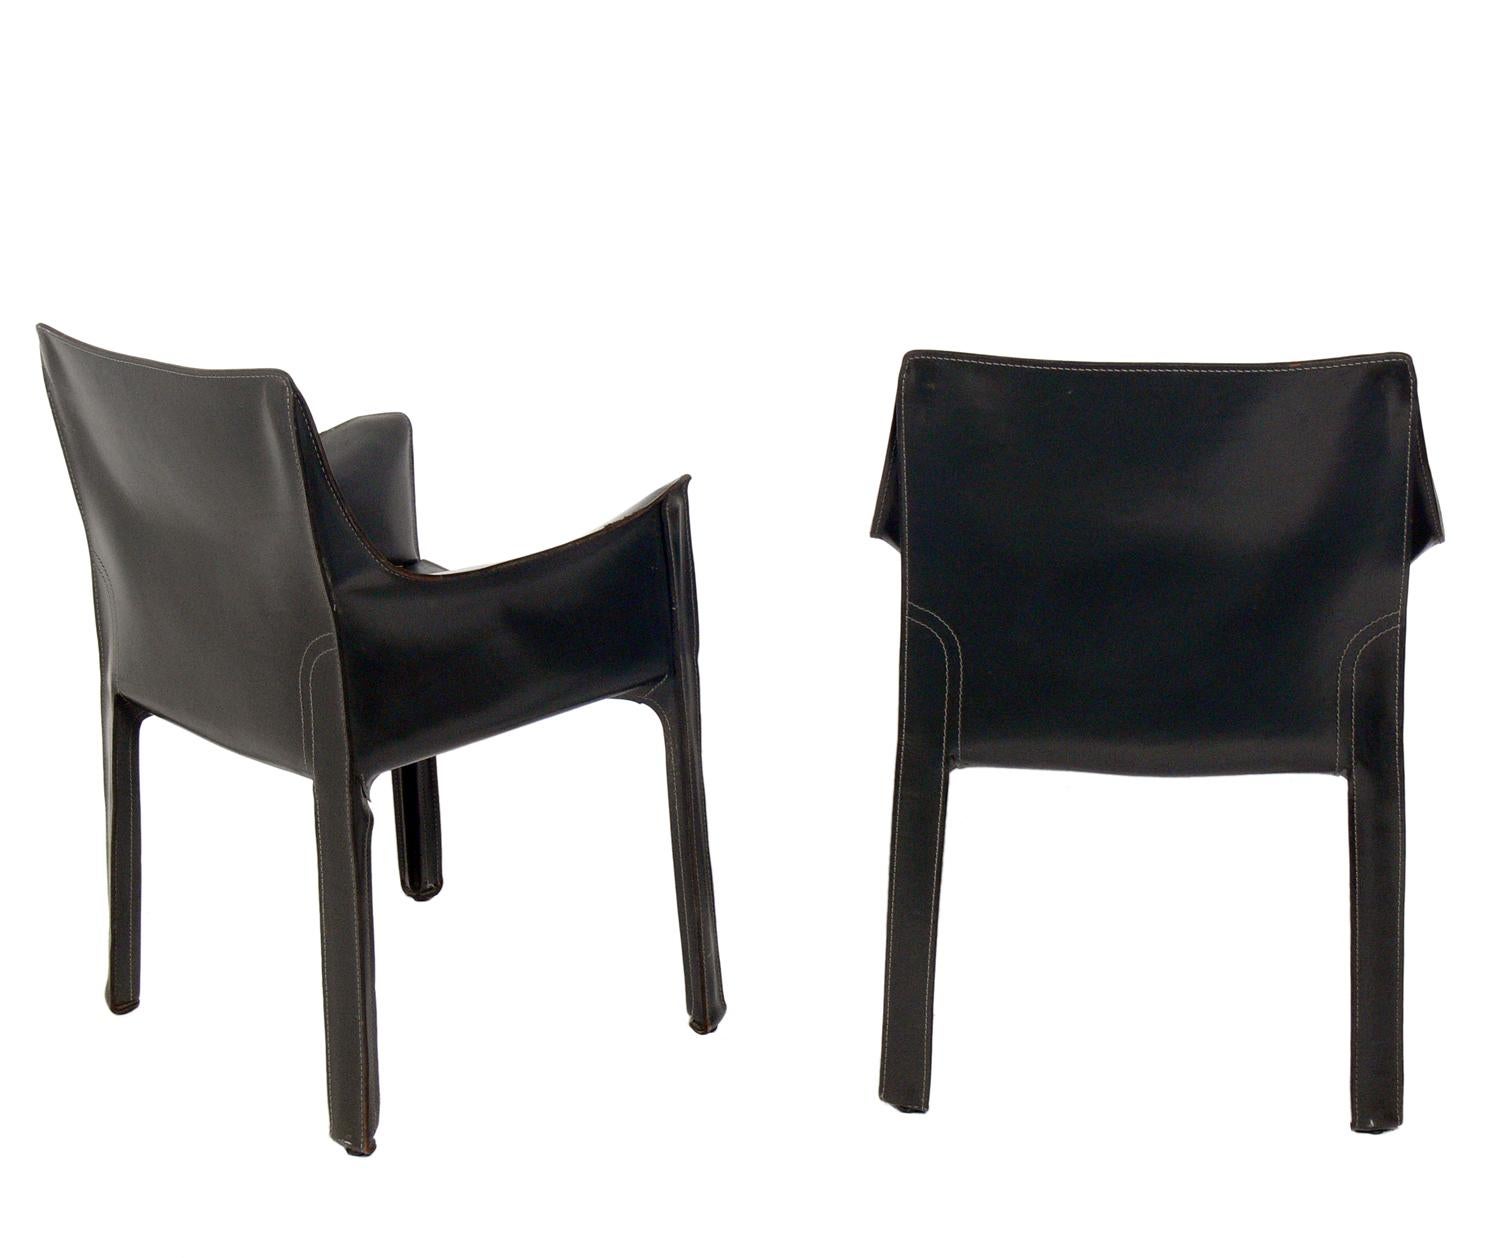 American Pair of Charcoal Gray Leather Cab Chairs by Mario Bellini for Cassina